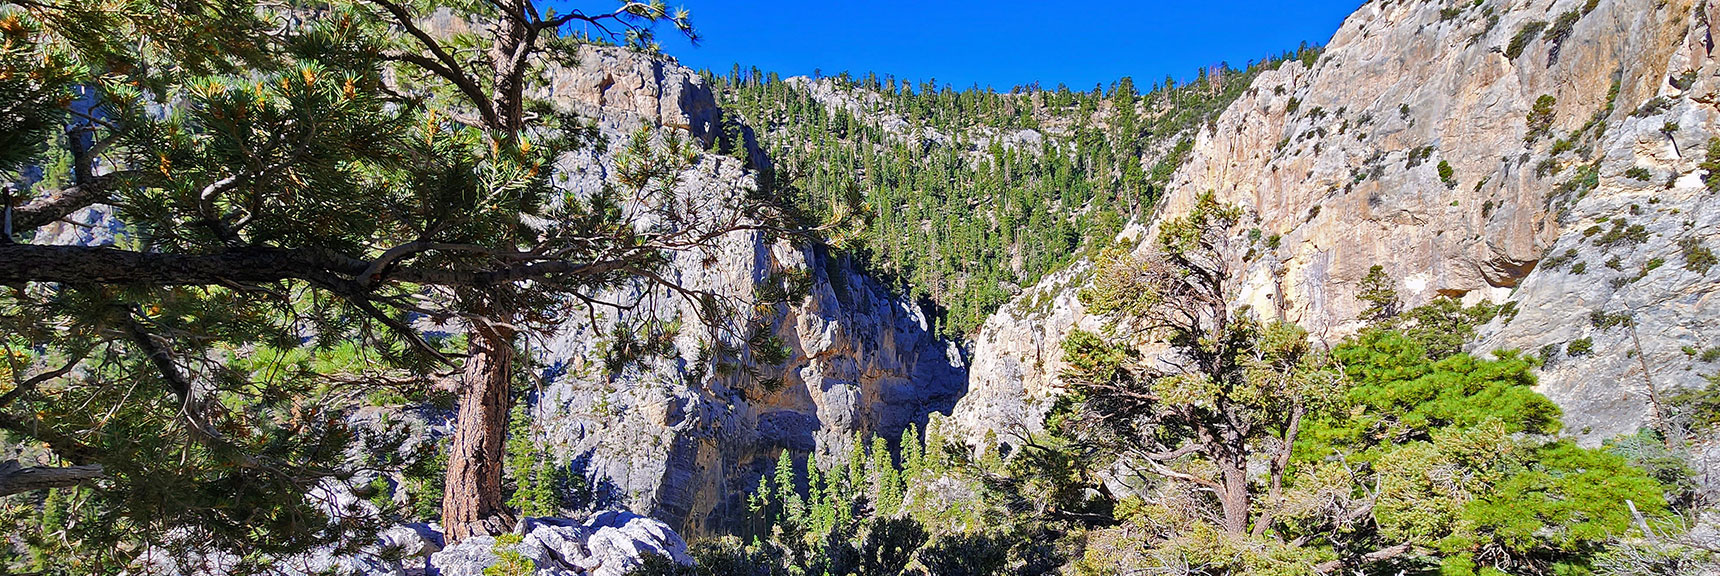 View Down into Slot Canyon Area of Fletcher Canyon | Fletcher Canyon / Fletcher Peak / Cockscomb Ridge Circuit | Mt. Charleston Wilderness | Spring Mountains, Nevada